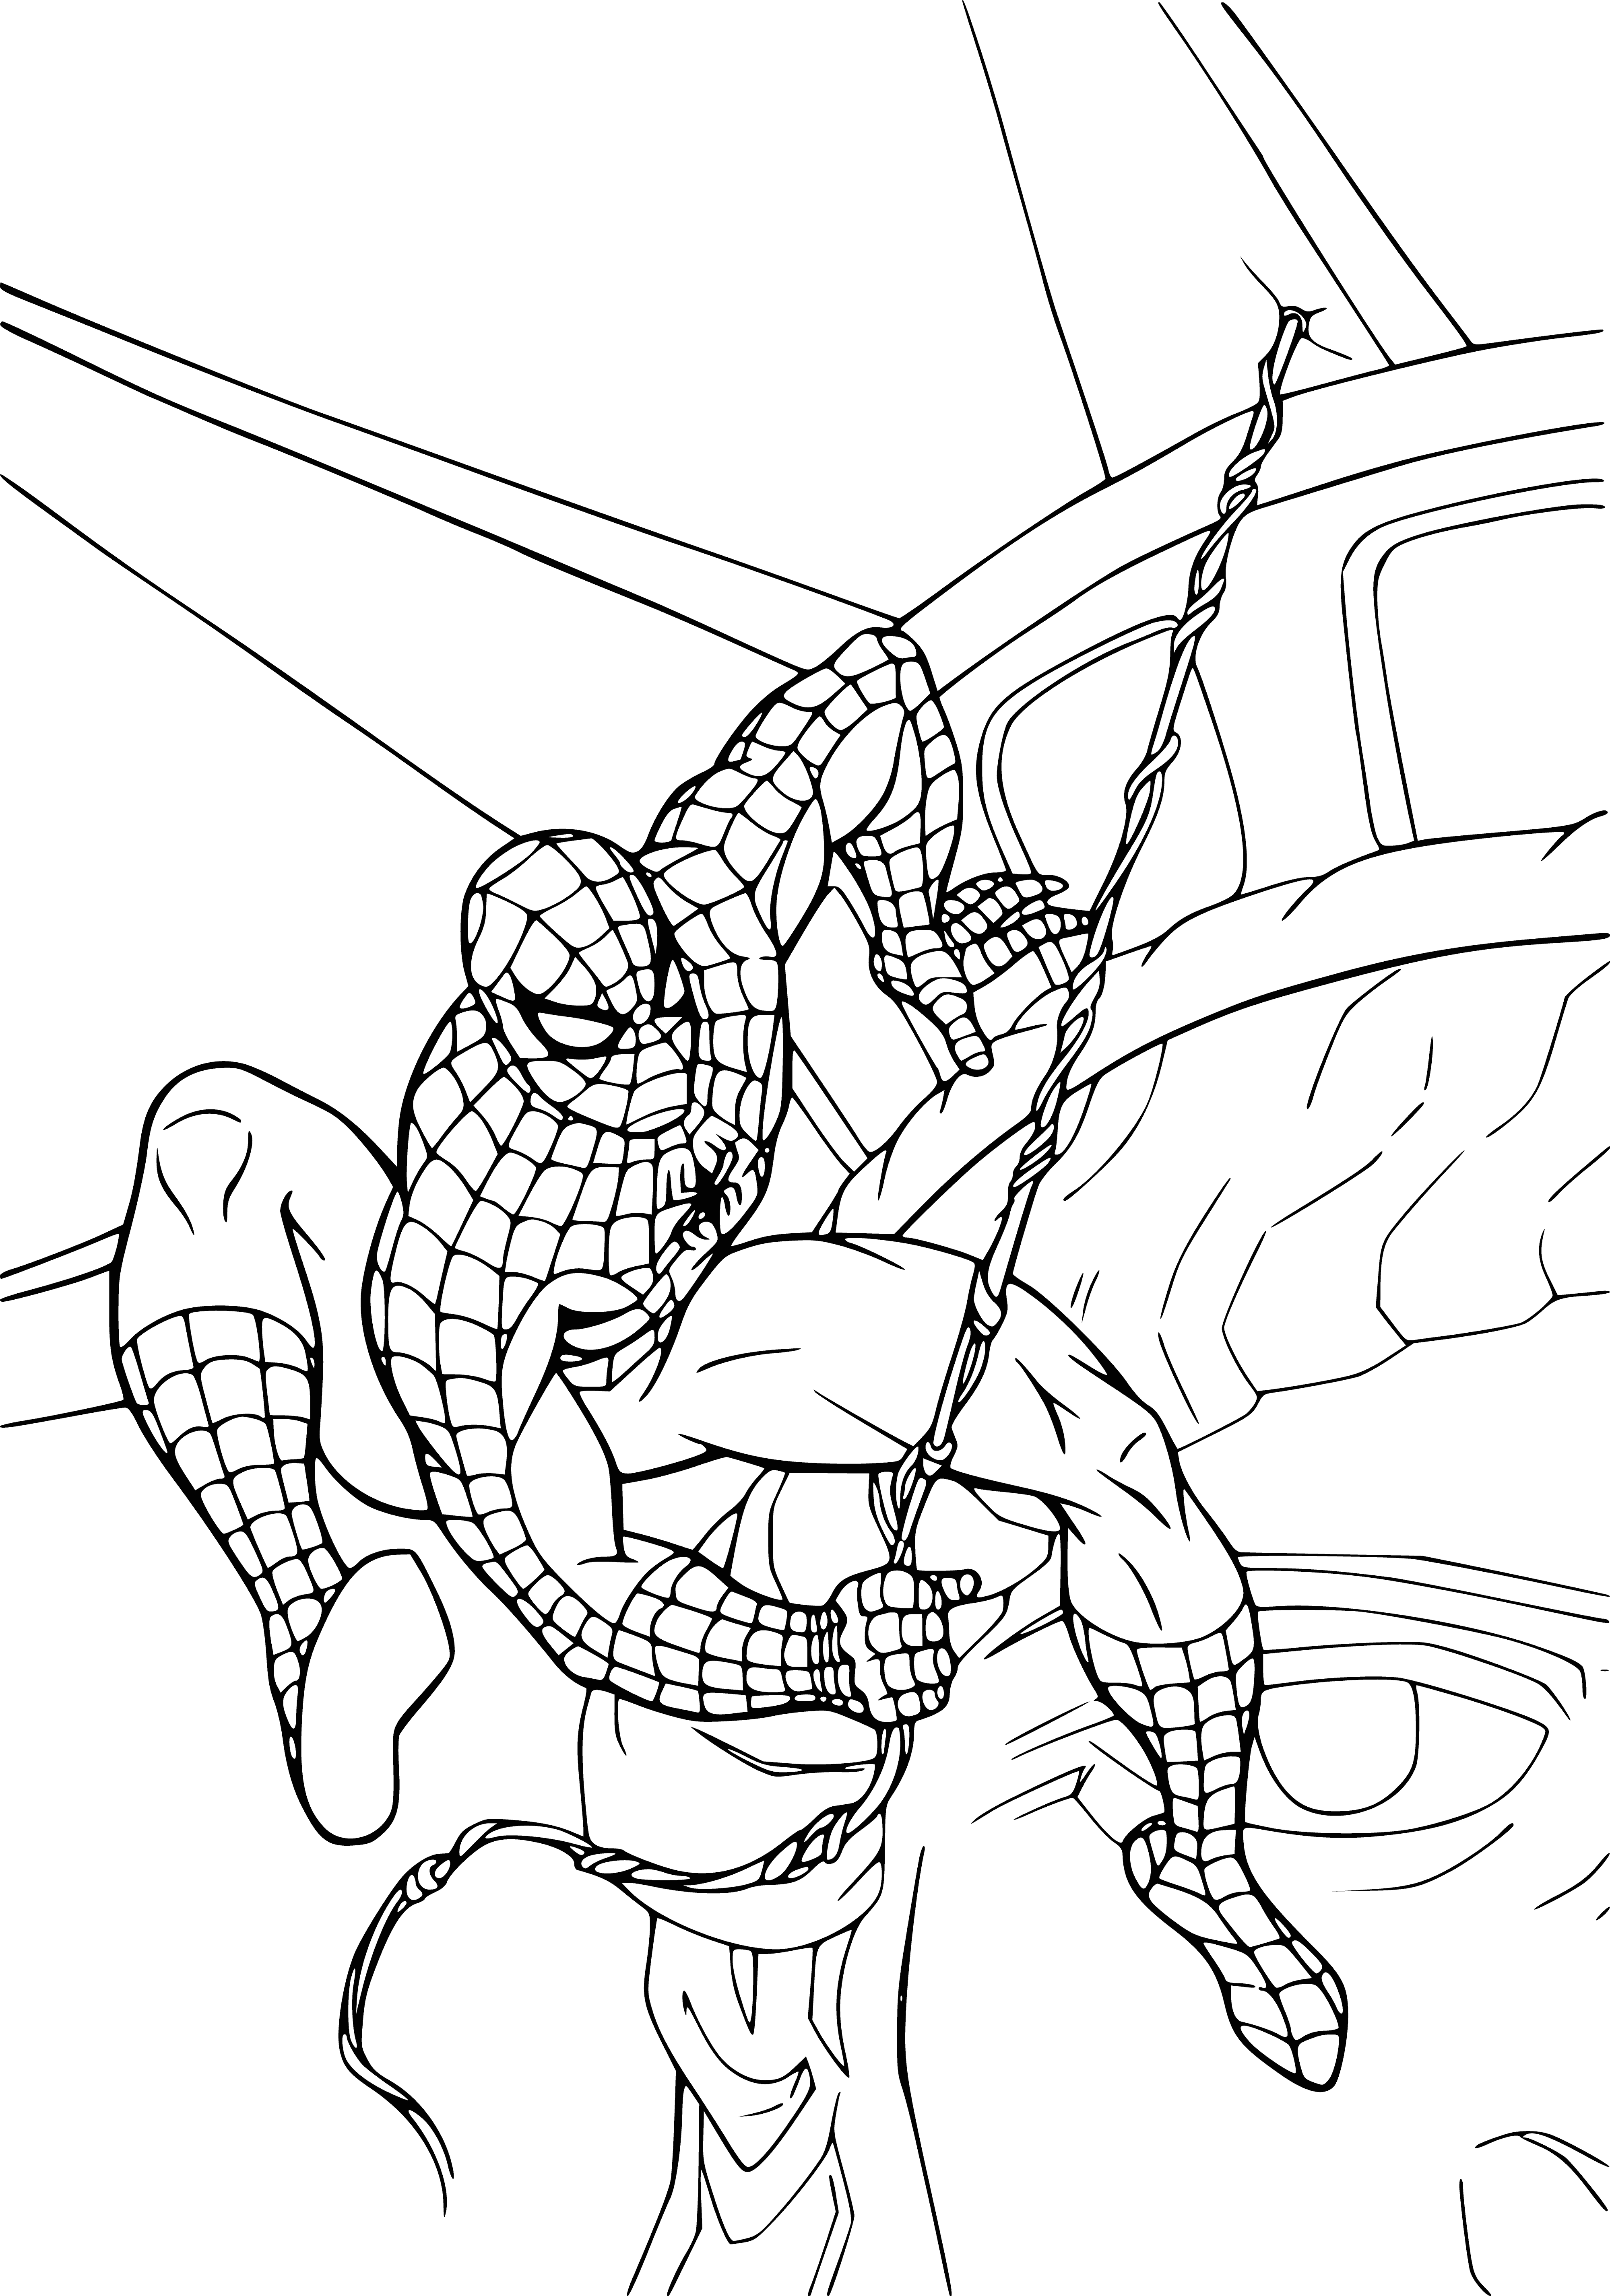 coloring page: Spider-Man fights crime in a red and blue costume w/ webbing, a black mask & red spider symbol. His hair is black & he uses special powers to help others.